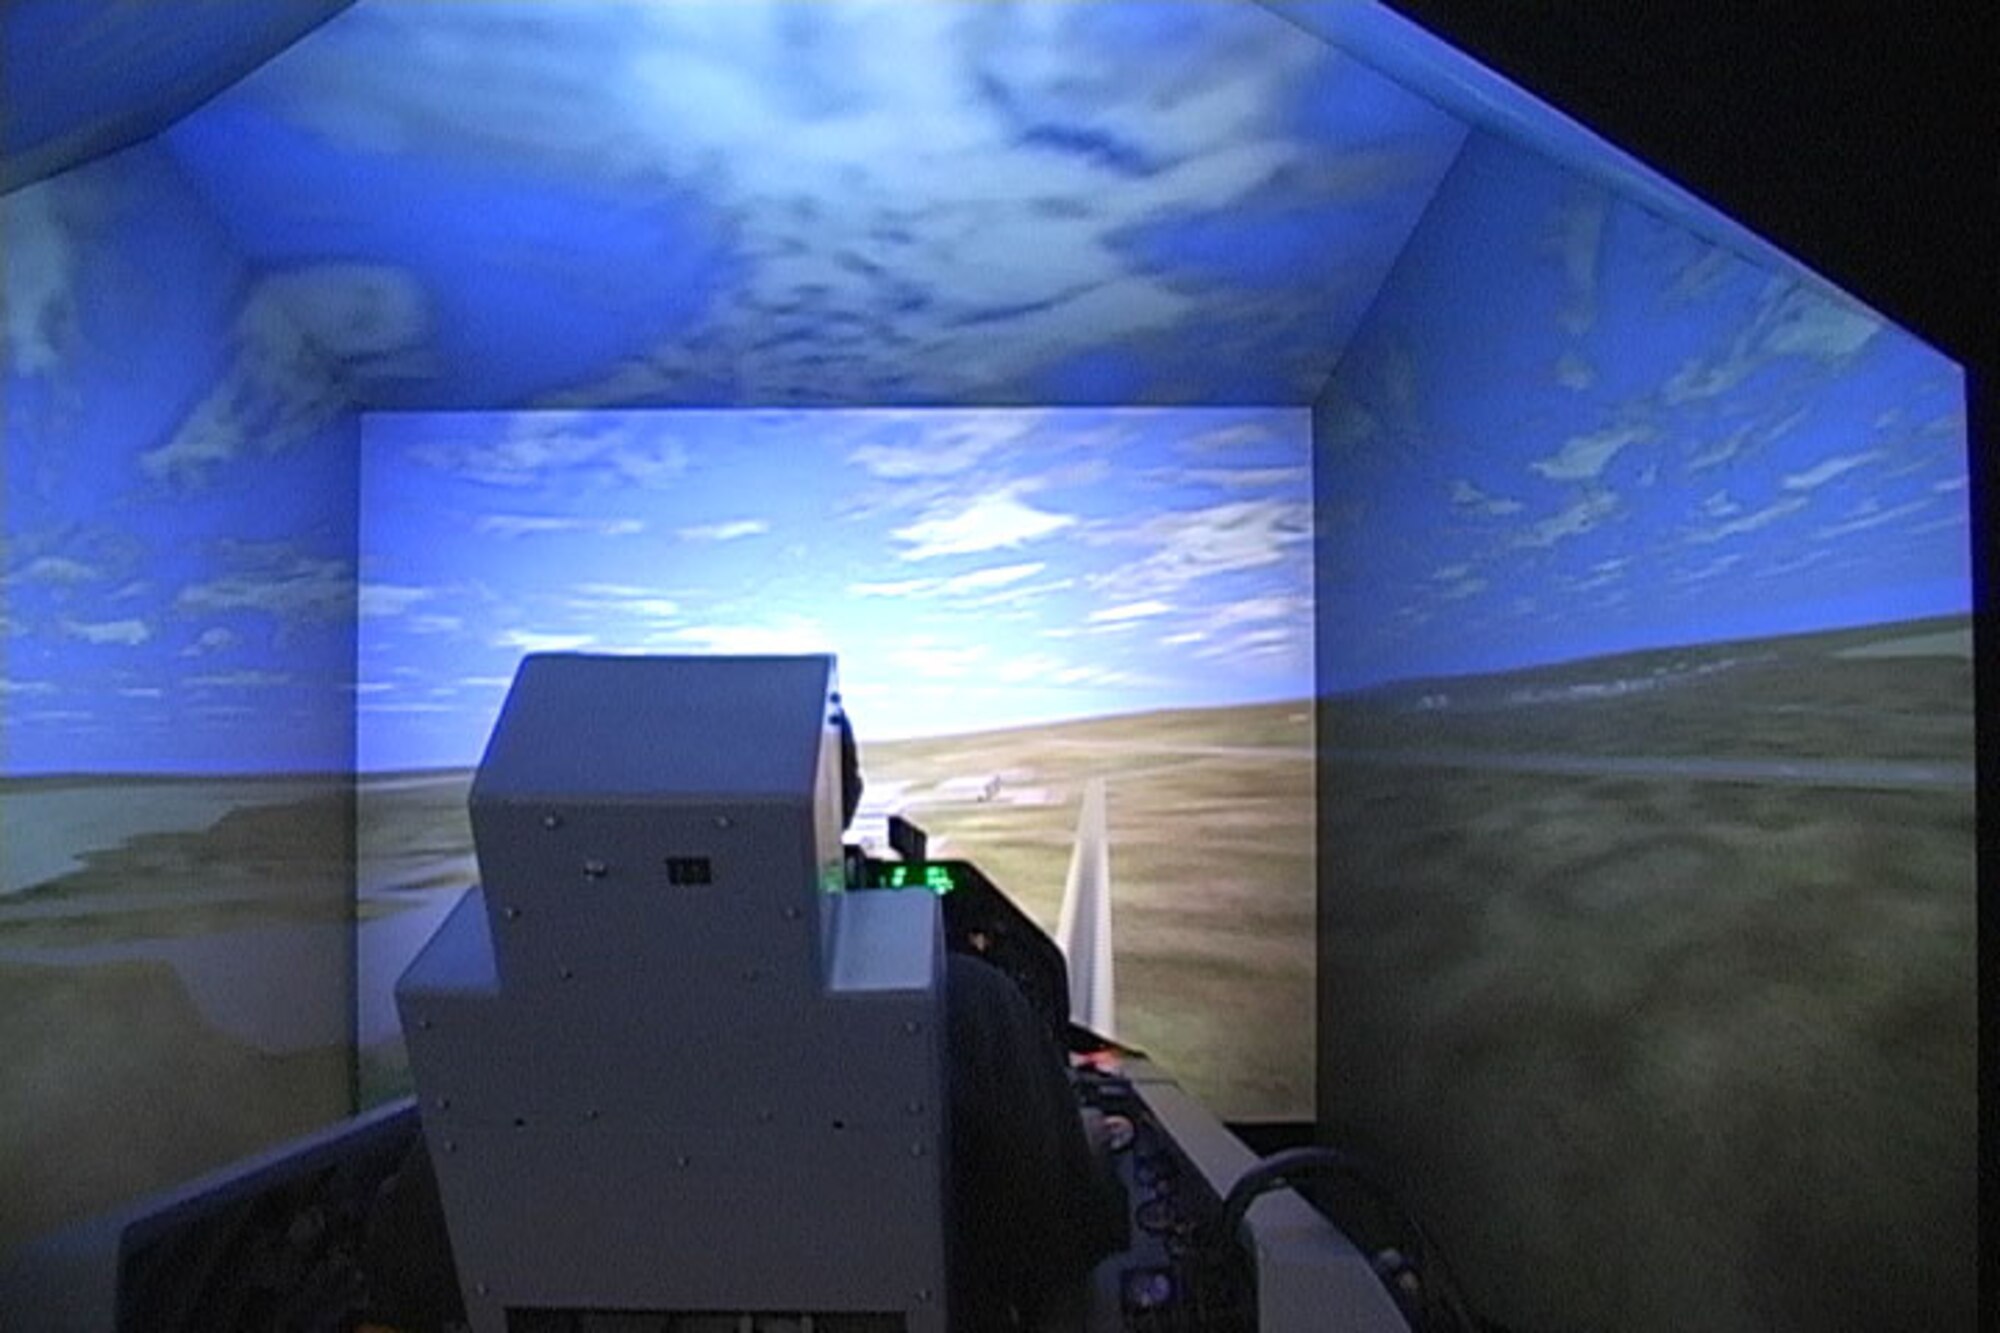 The 772nd Test Squadron’s Integrated Facility for Avionics System Test (IFAST) utilizes simulators to provide to the Air Force Test Center a live, virtual, and constructive modeling and simulation system for a flight test environment. (Photo courtesy of 772nd Test Squadron)